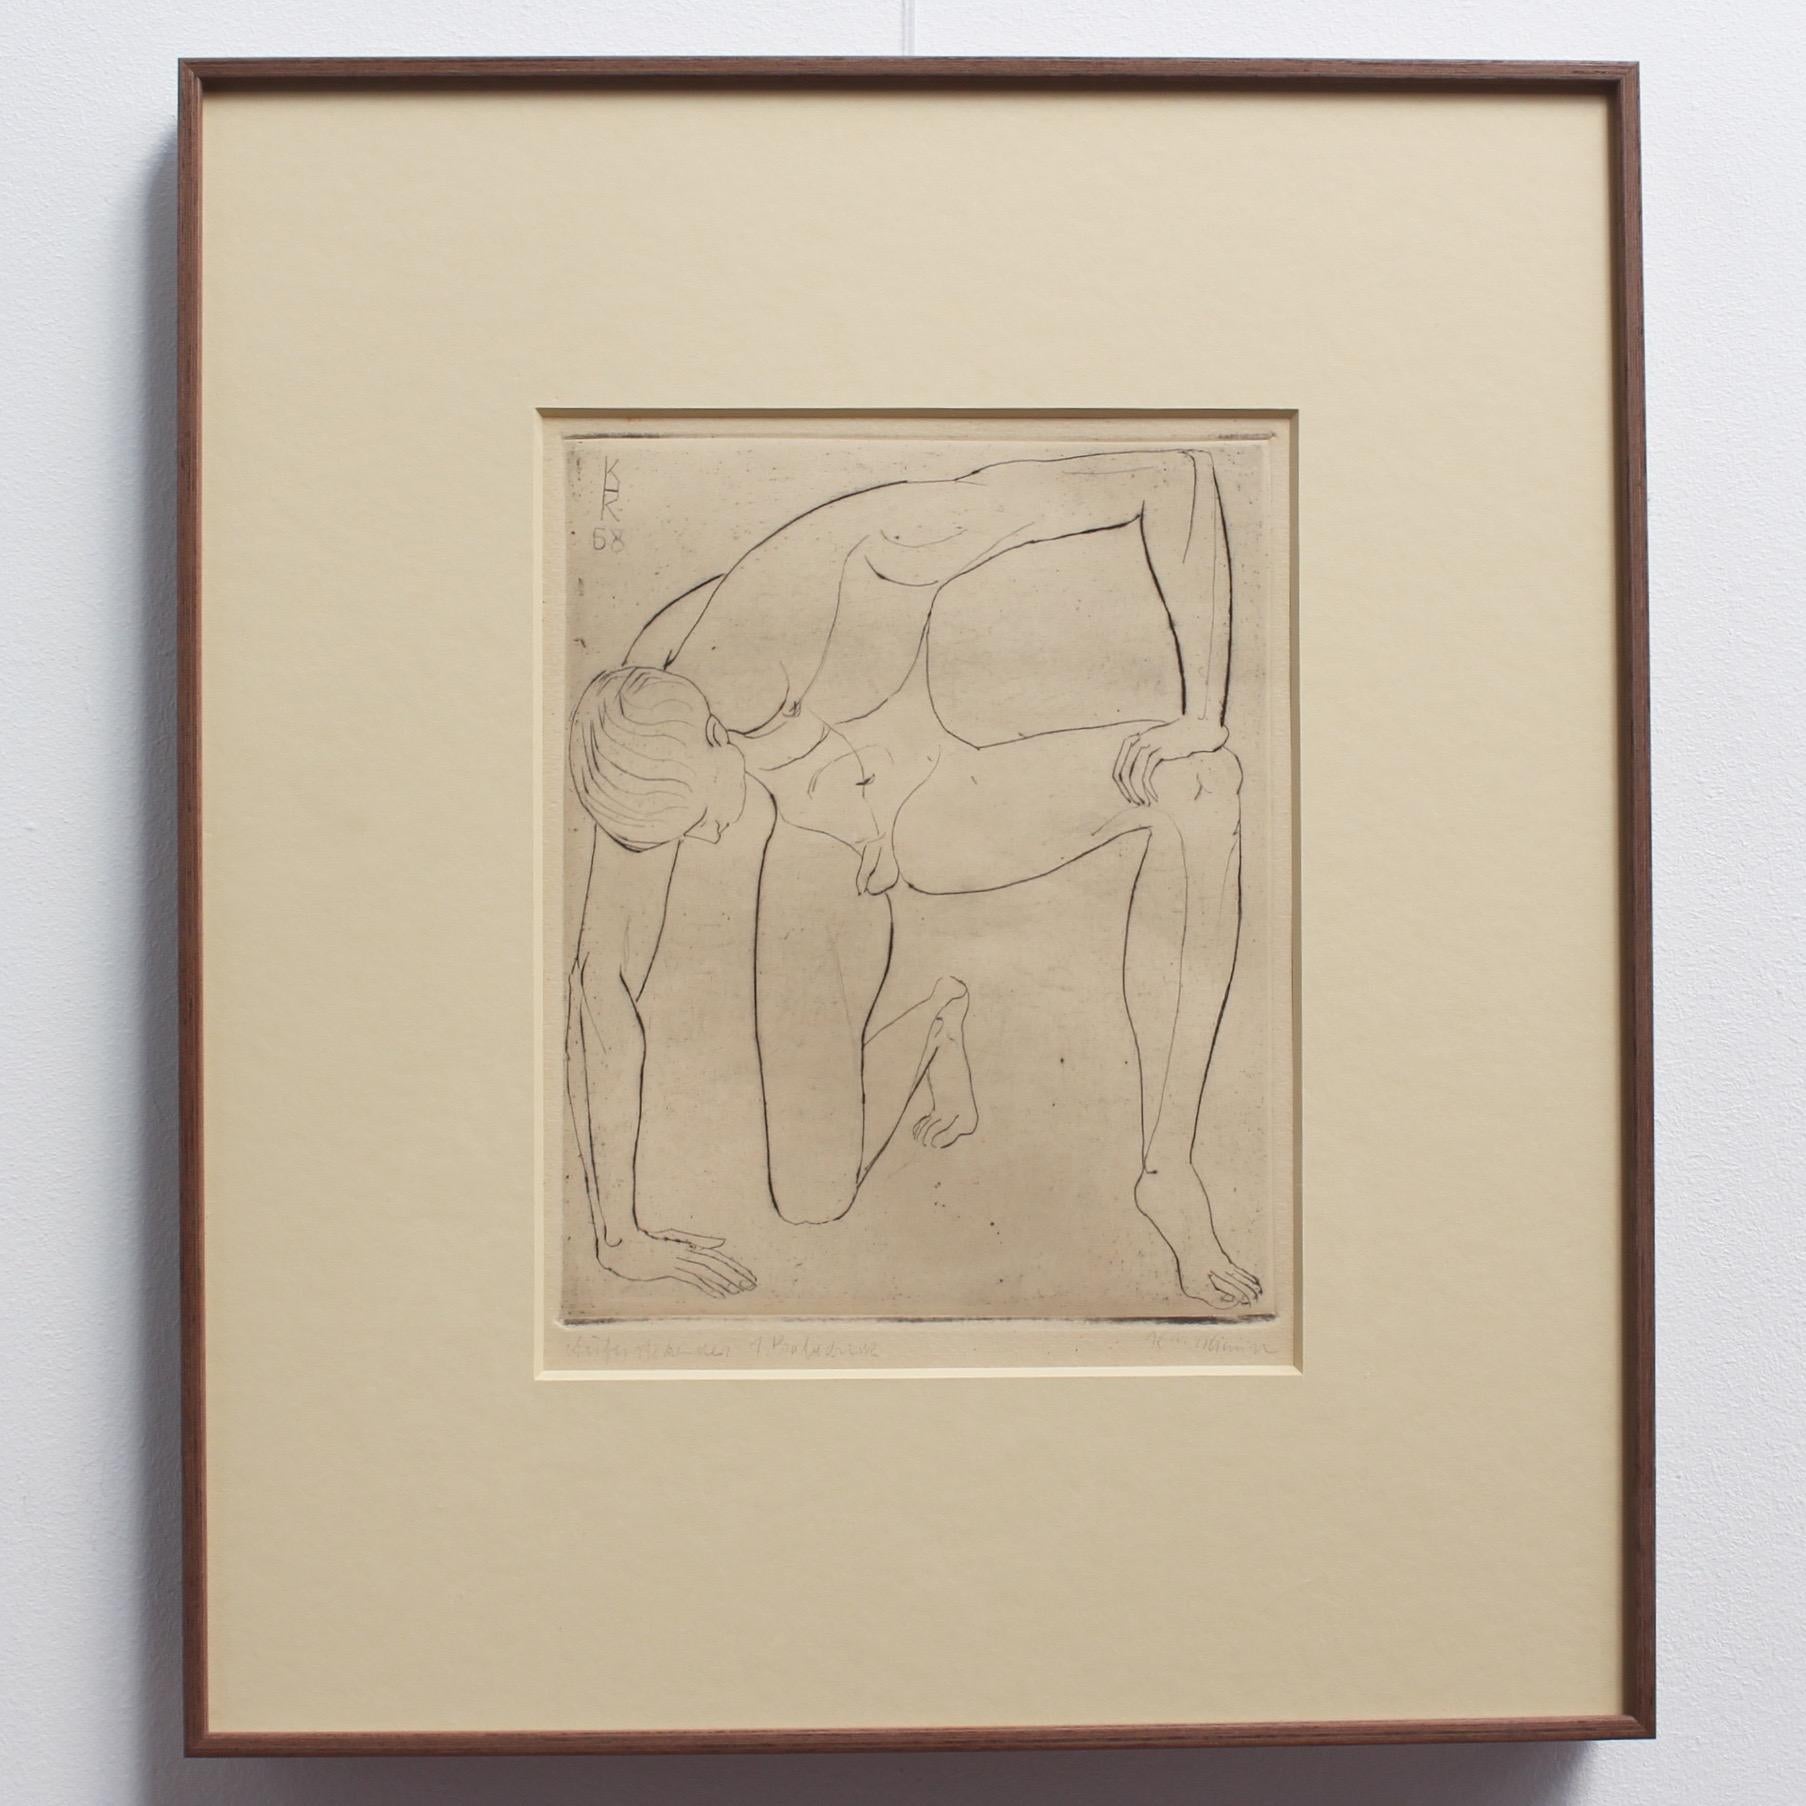 'Study of a Nude Young Man' by KHK, 1958, Mid-Century Etching of Male Nude - Print by Unknown